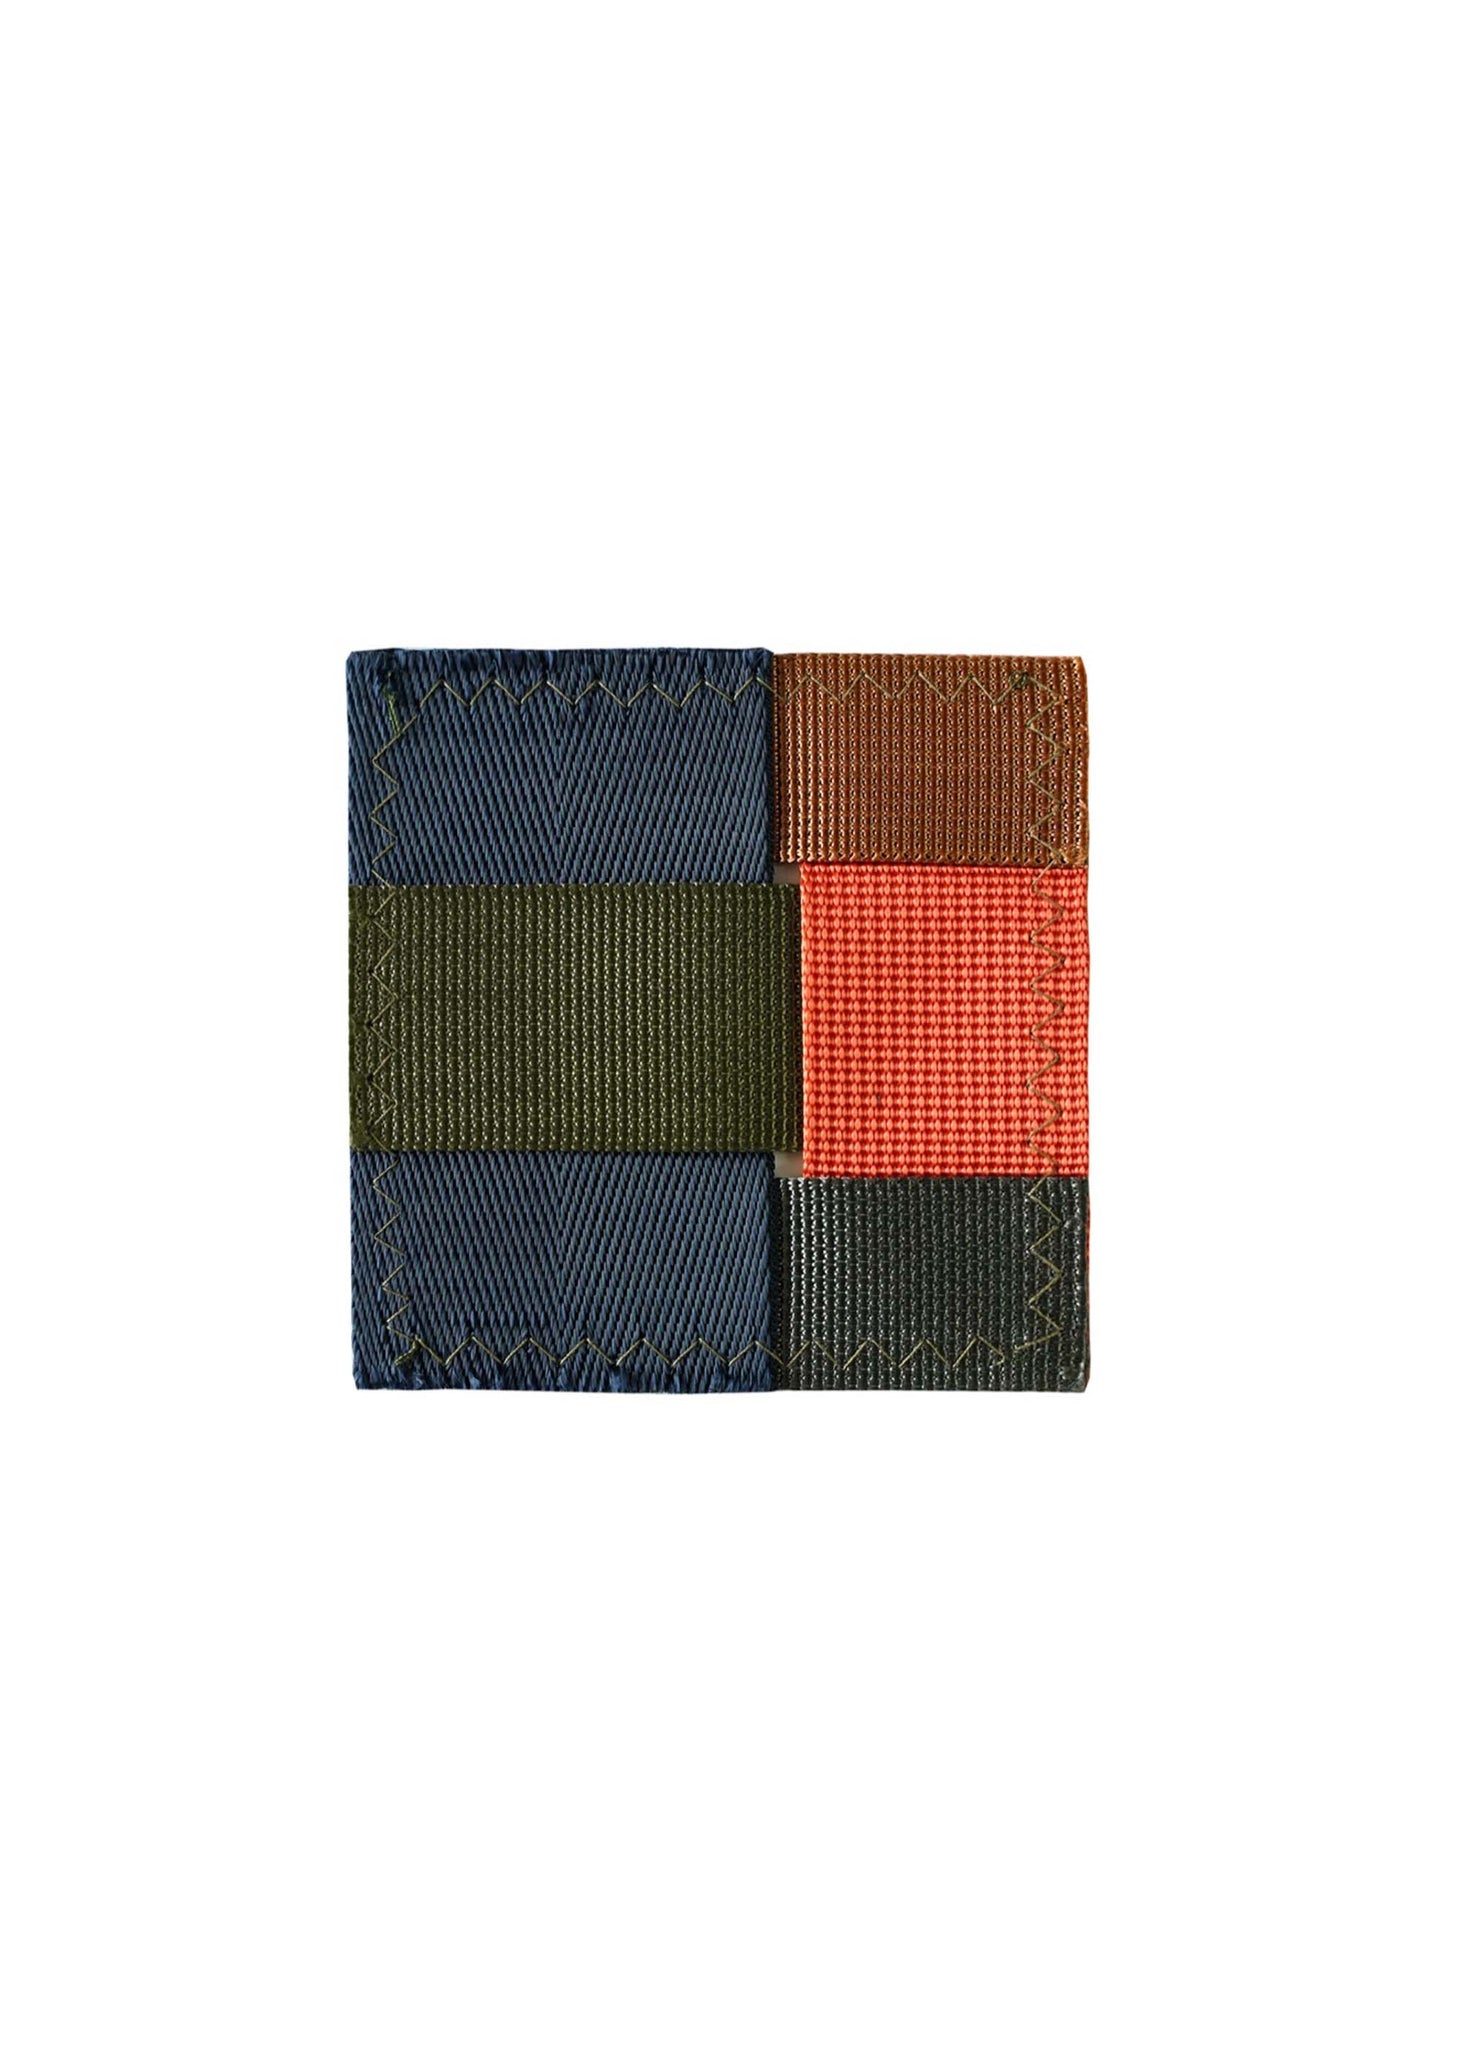 TANCHEN: Navy/Persimmon/Olive Knit Nylon Coaster - 157Moments